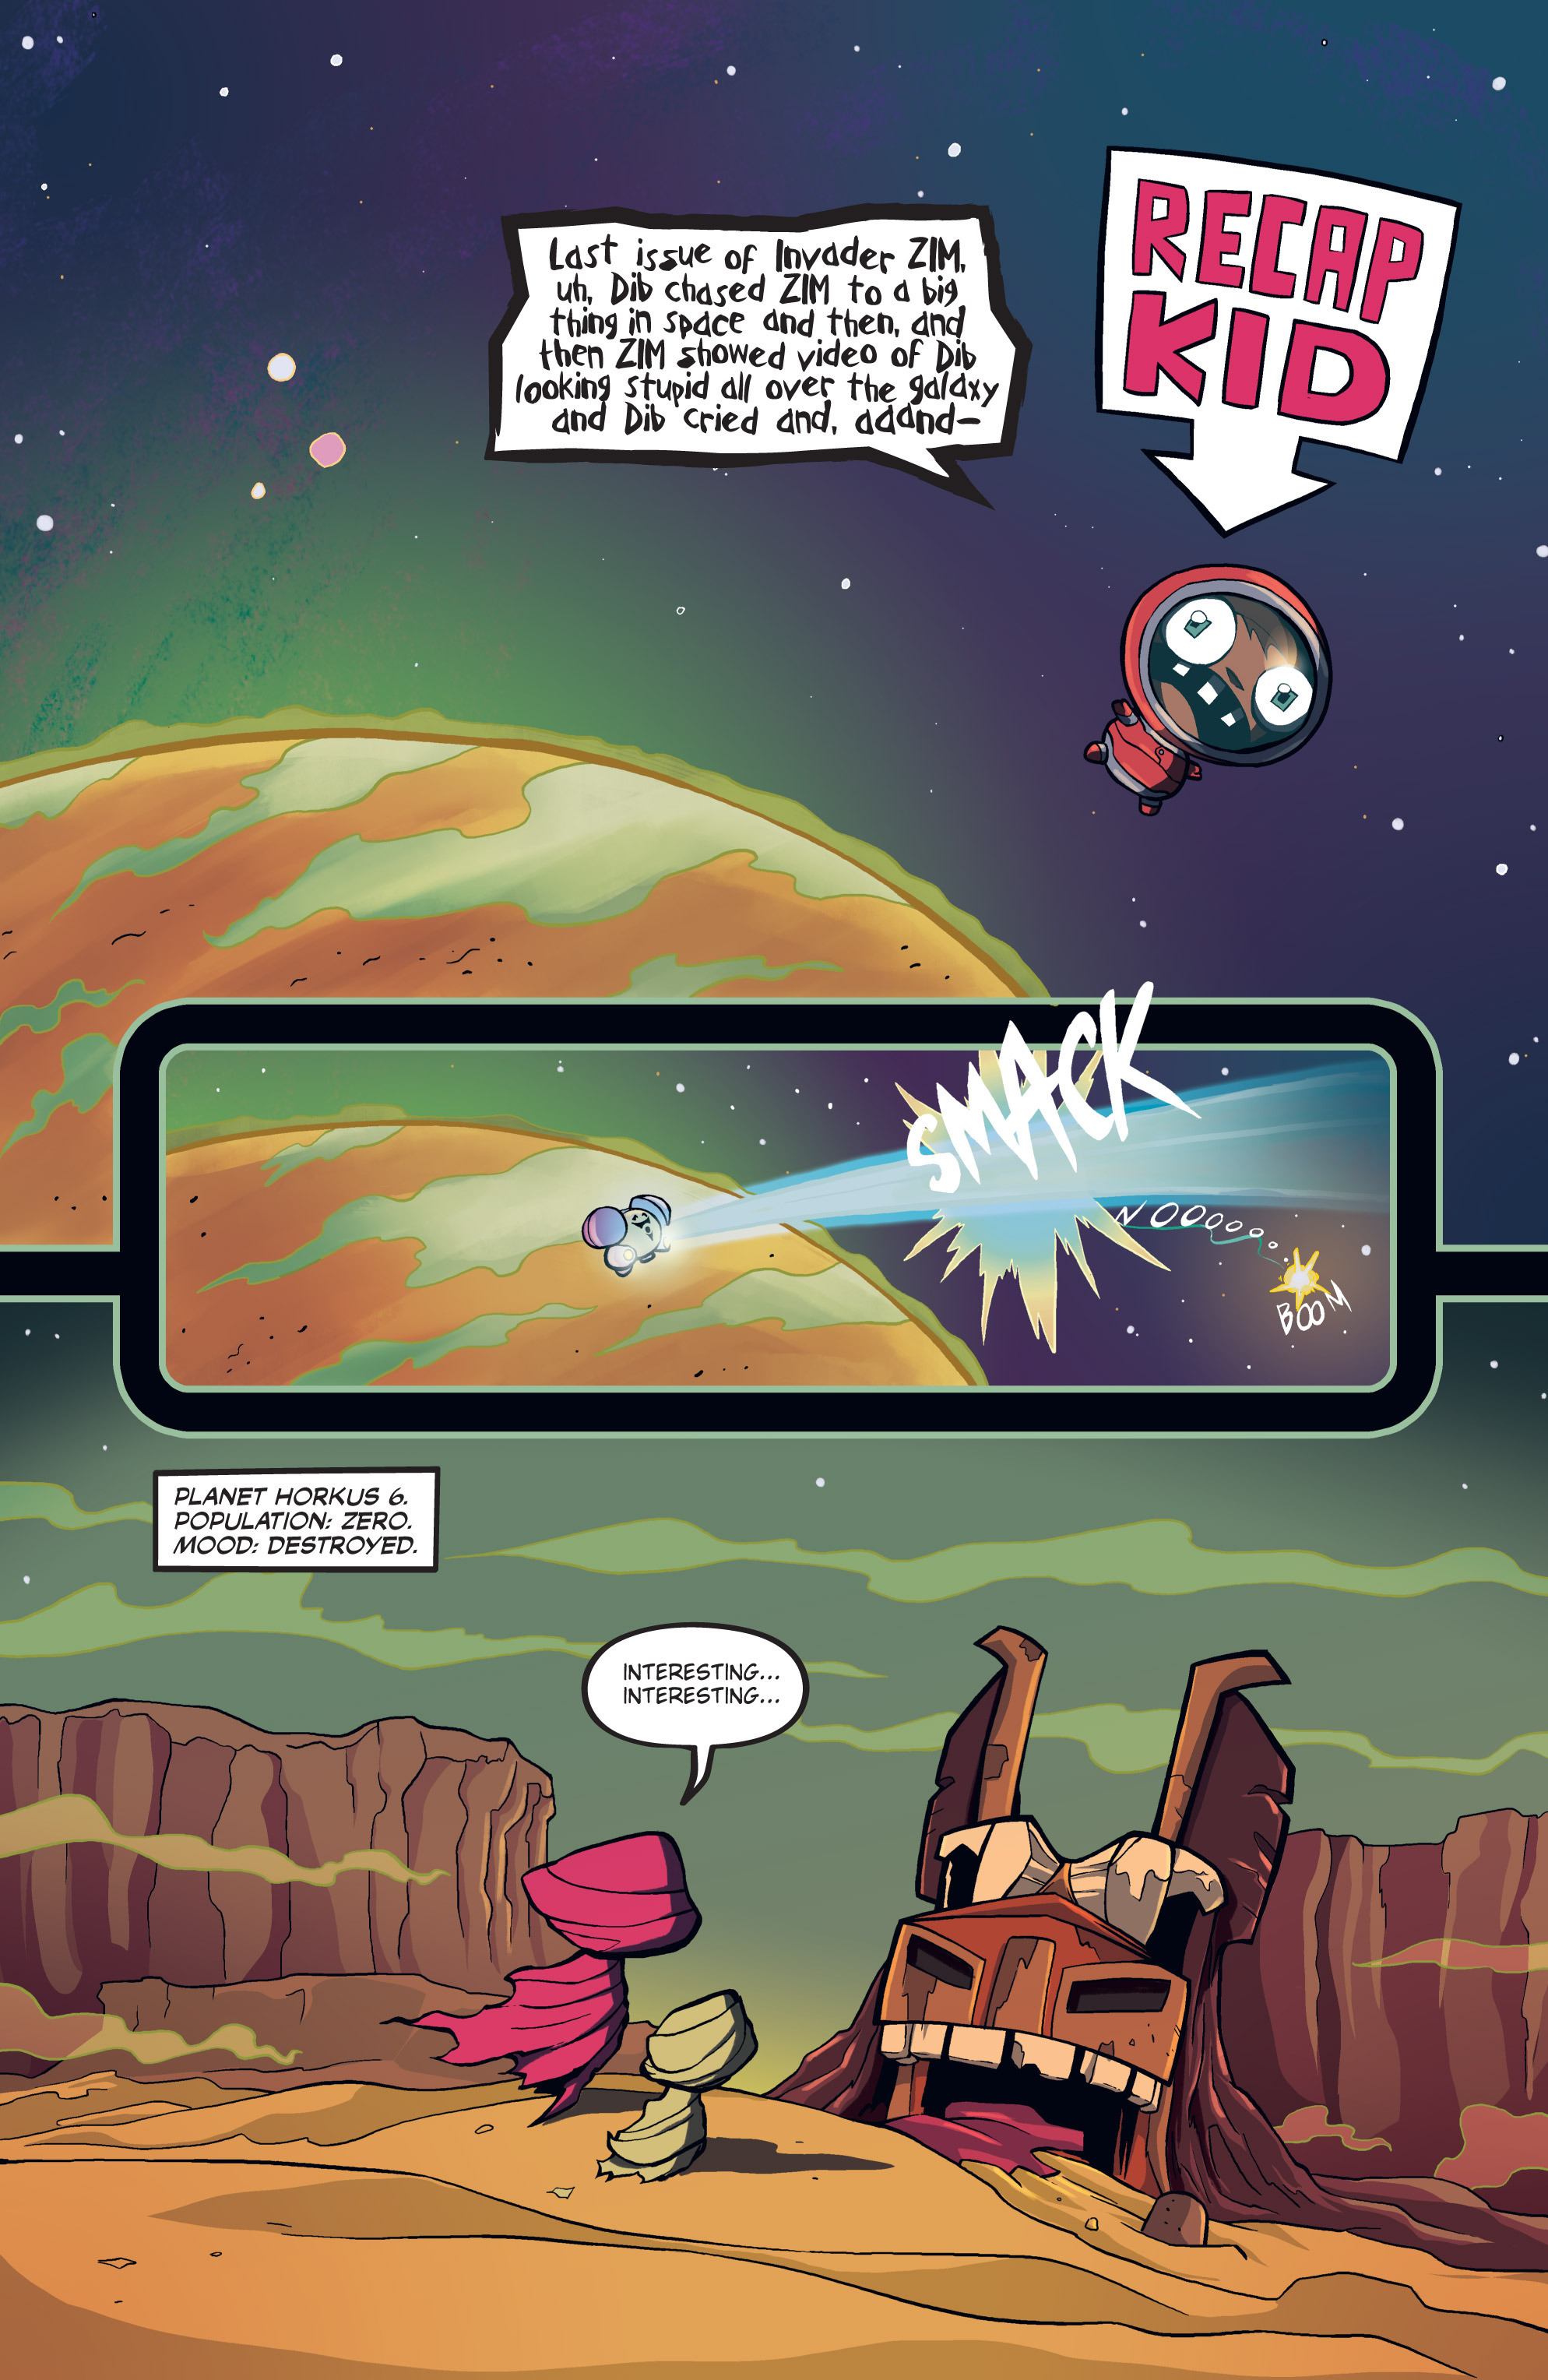 Invader Zim (2015-): Chapter 3 - Page 3